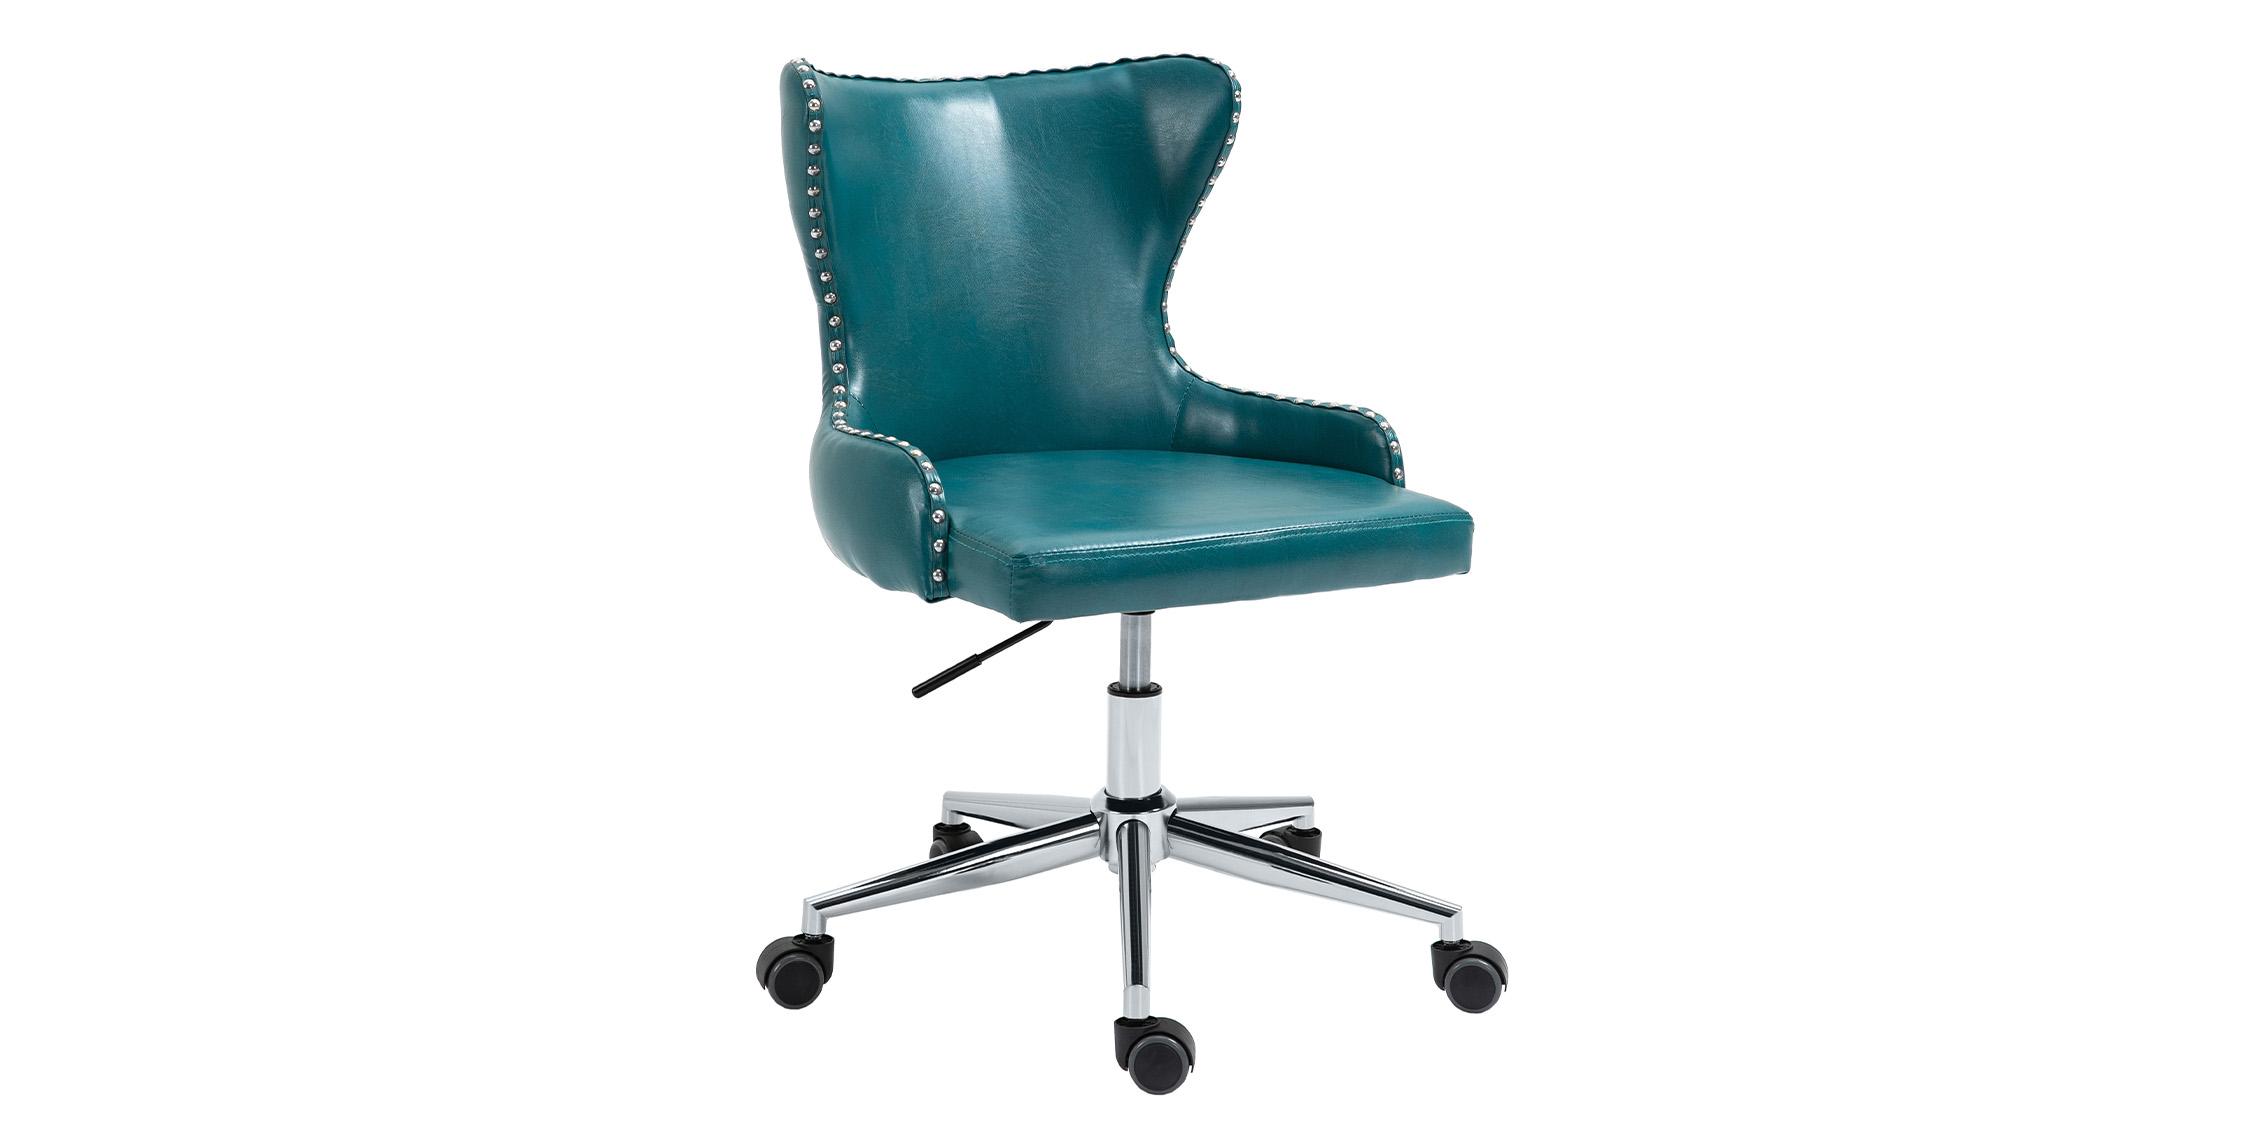 Contemporary, Modern Office Chair HENDRIX 168Blue 168Blue in Chrome, Blue Faux Leather